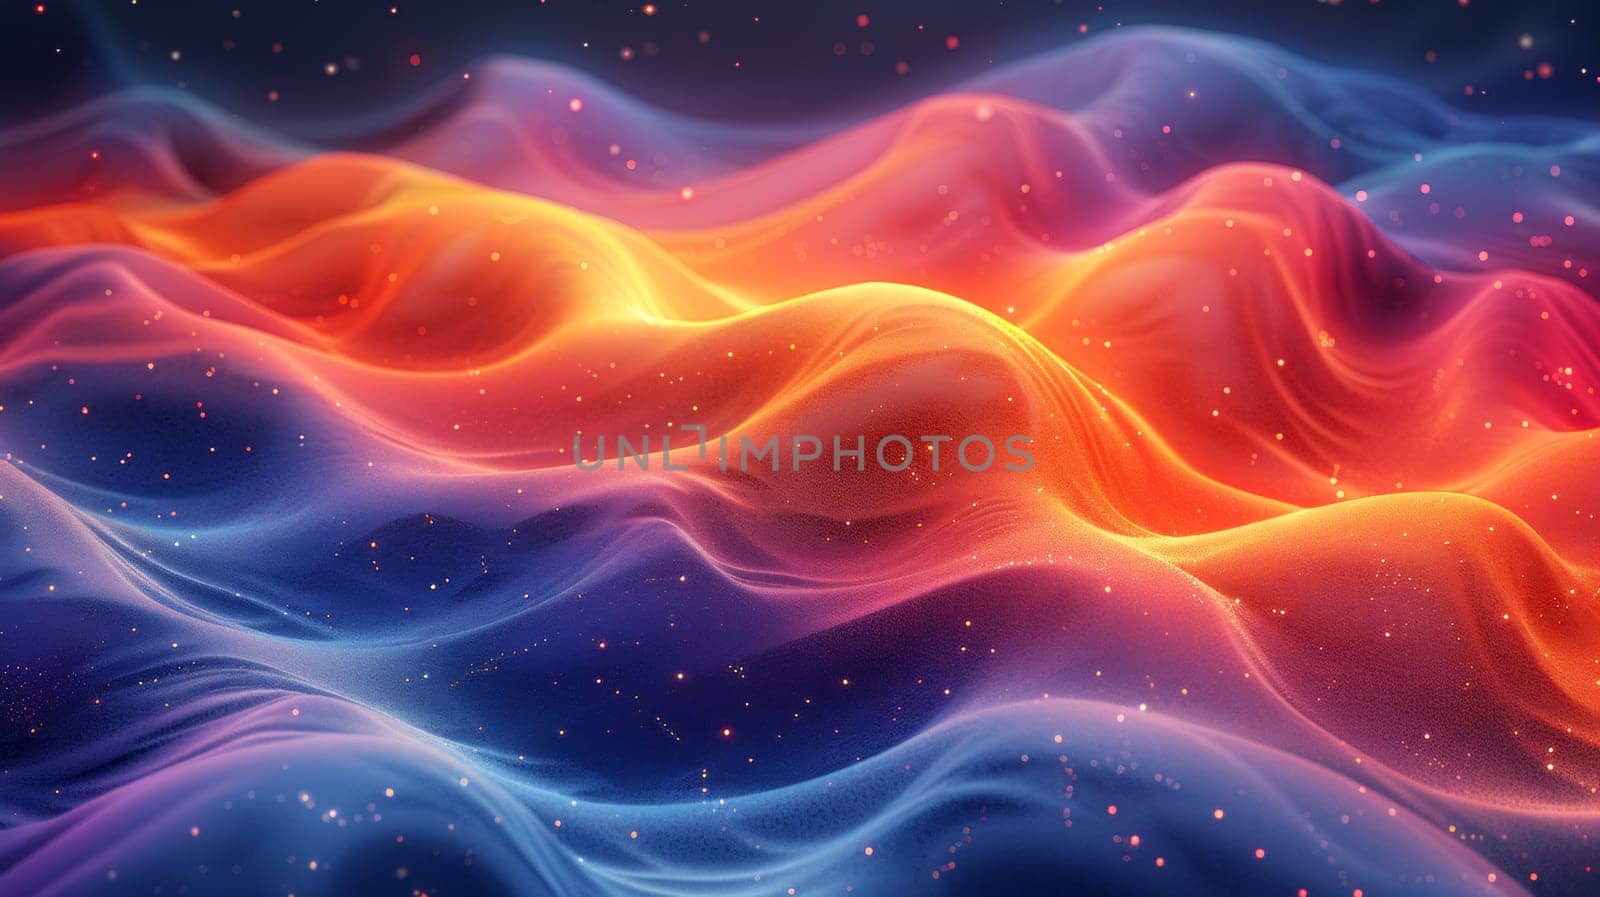 A colorful abstract image of waves and stars